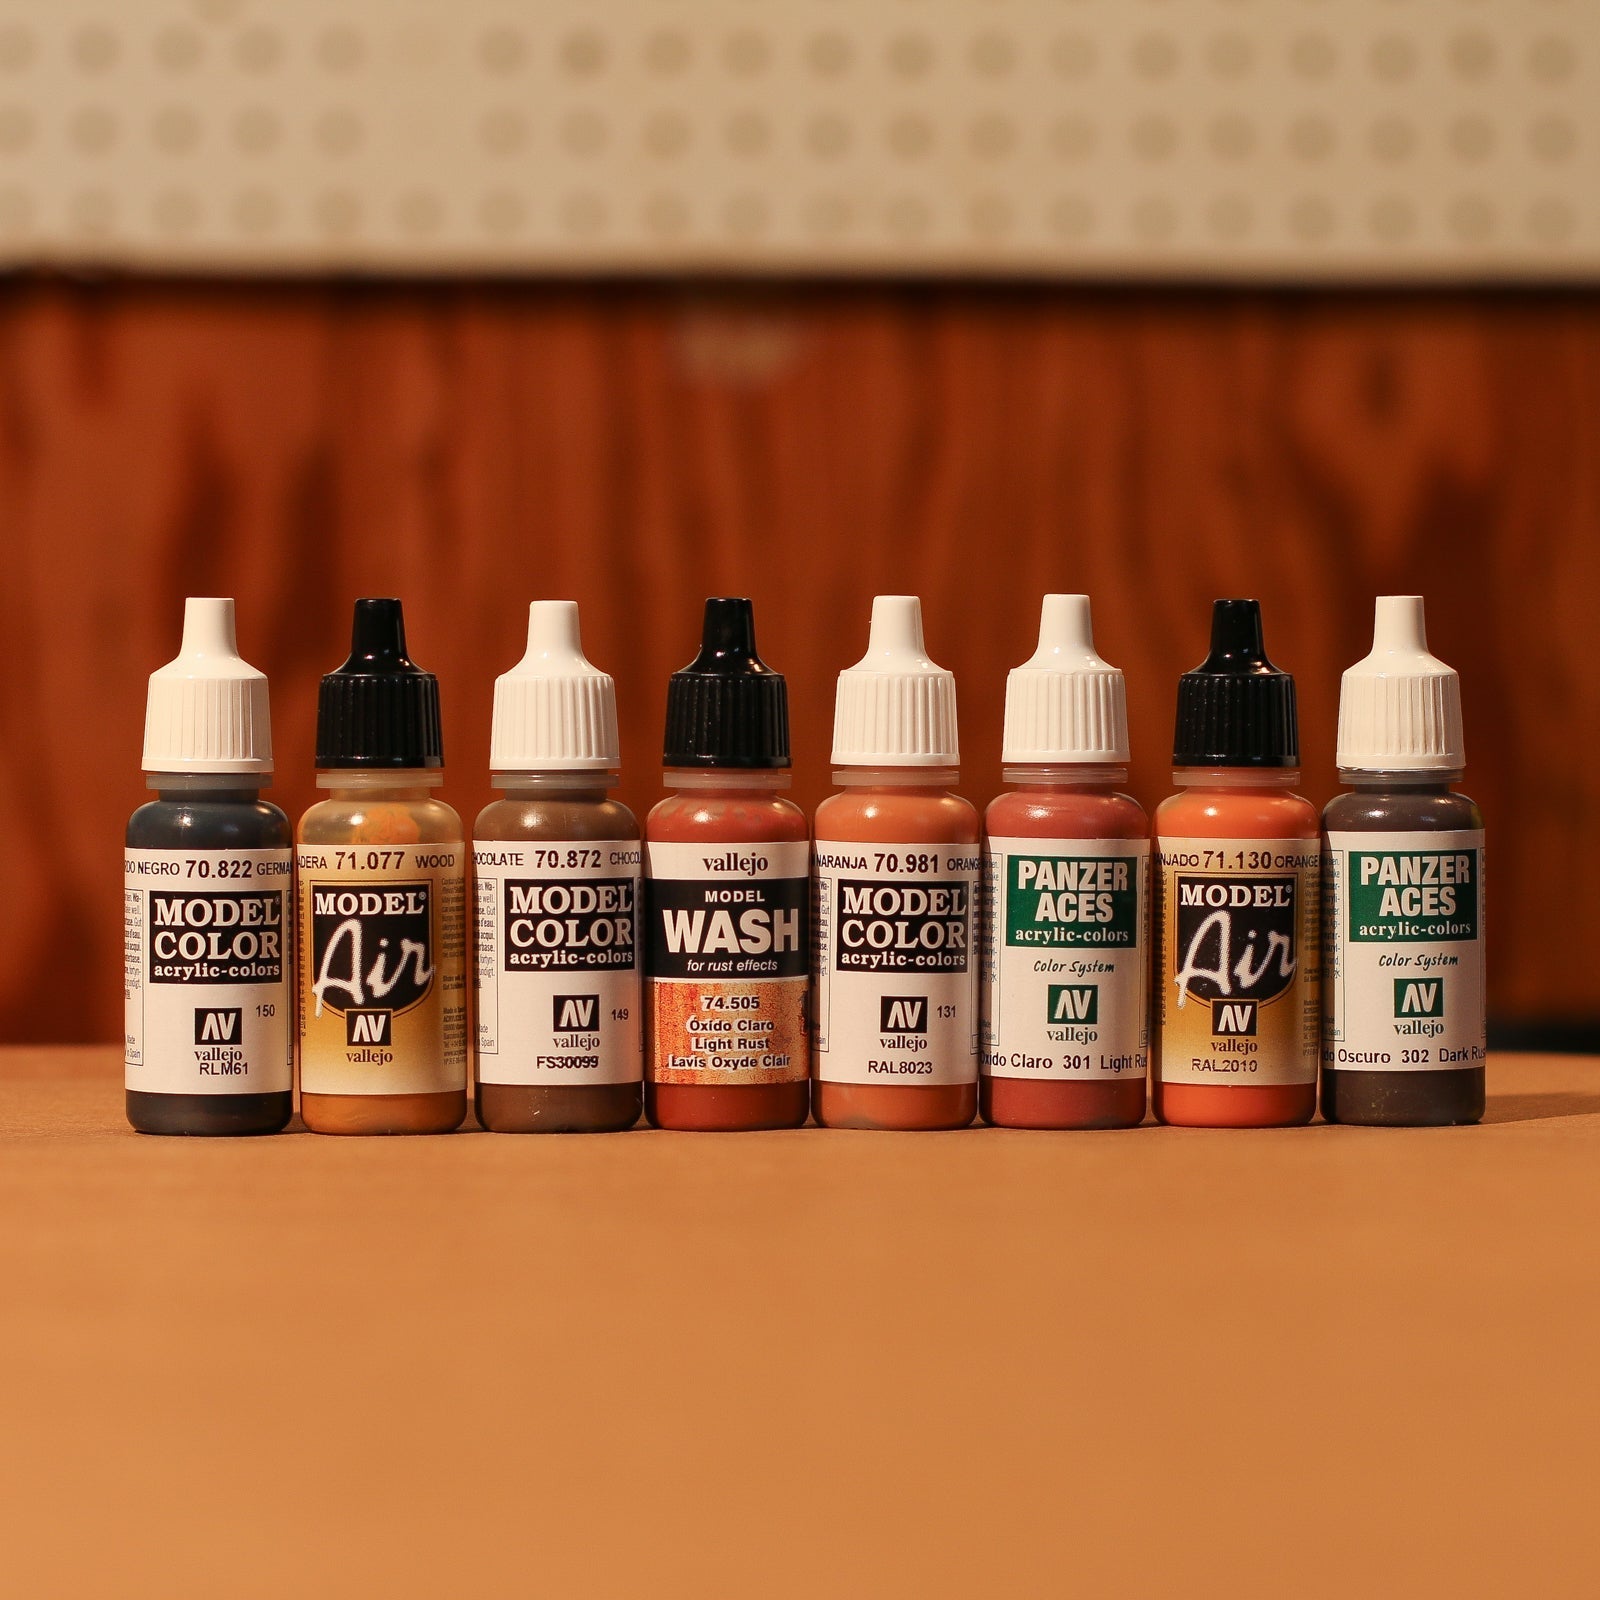 Acrylicos Vallejo Rust, Stain & Streaking, Model Air Paint Set, 1/2 Fl. oz. Bottles, 8 Colors - Micro - Mark Acrylic Airbrush Paint